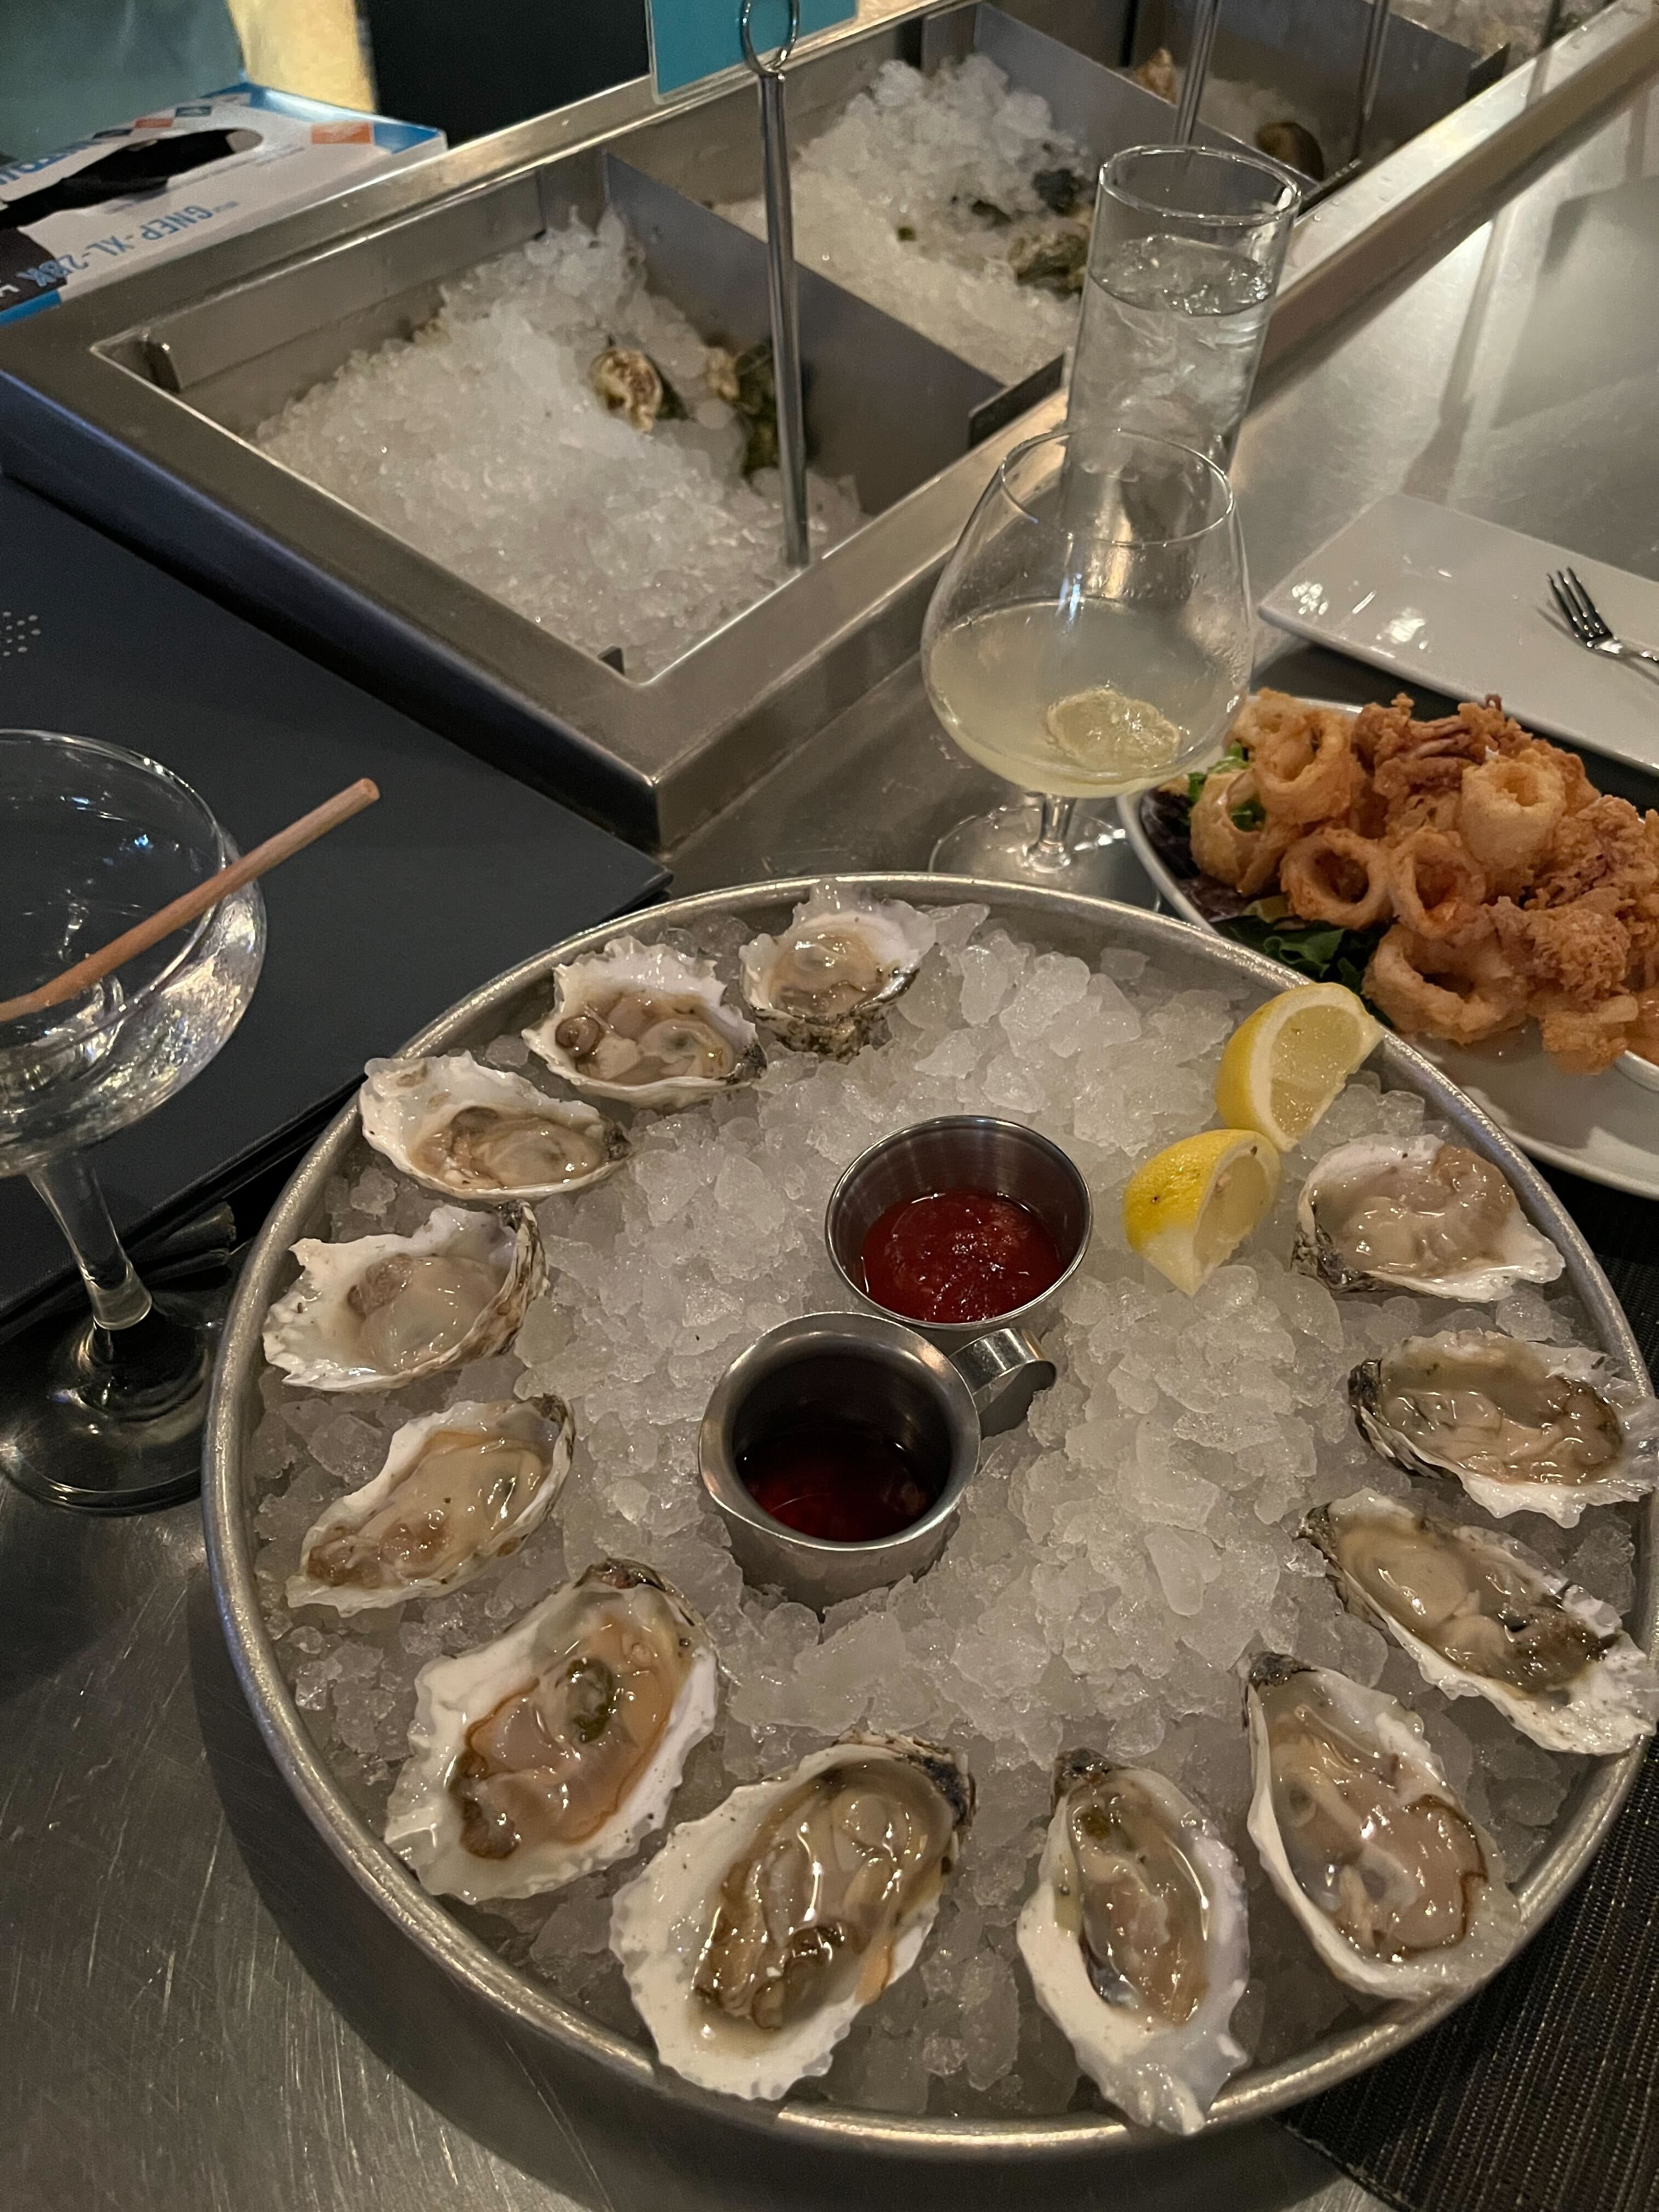 A tray of dozen oysters and fried calamari to the side